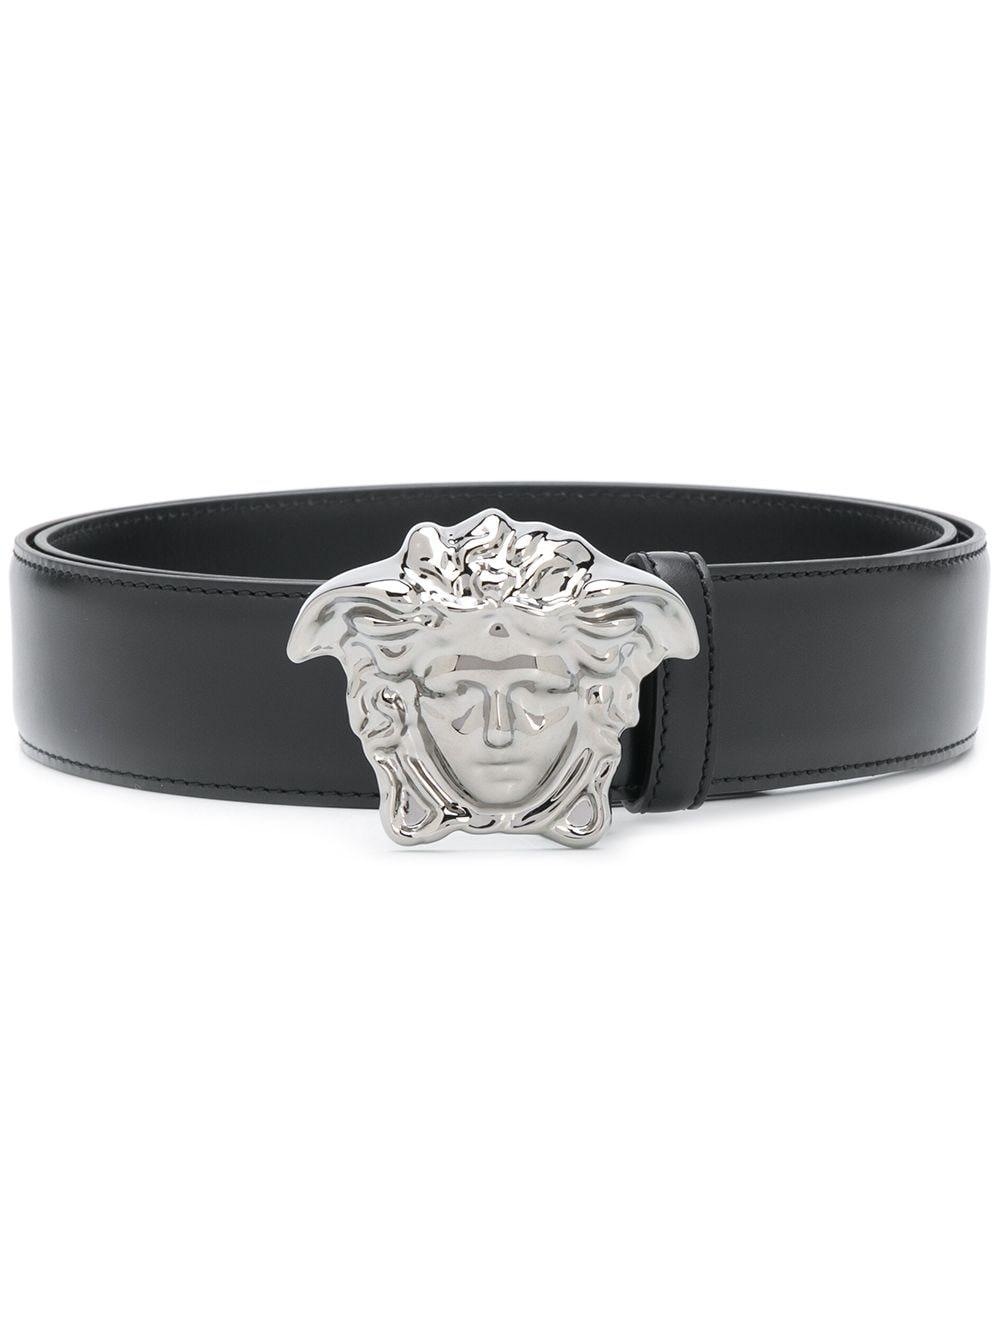 Versace Leather Palazzo Medusa Buckle Belt in Black for Men | Lyst